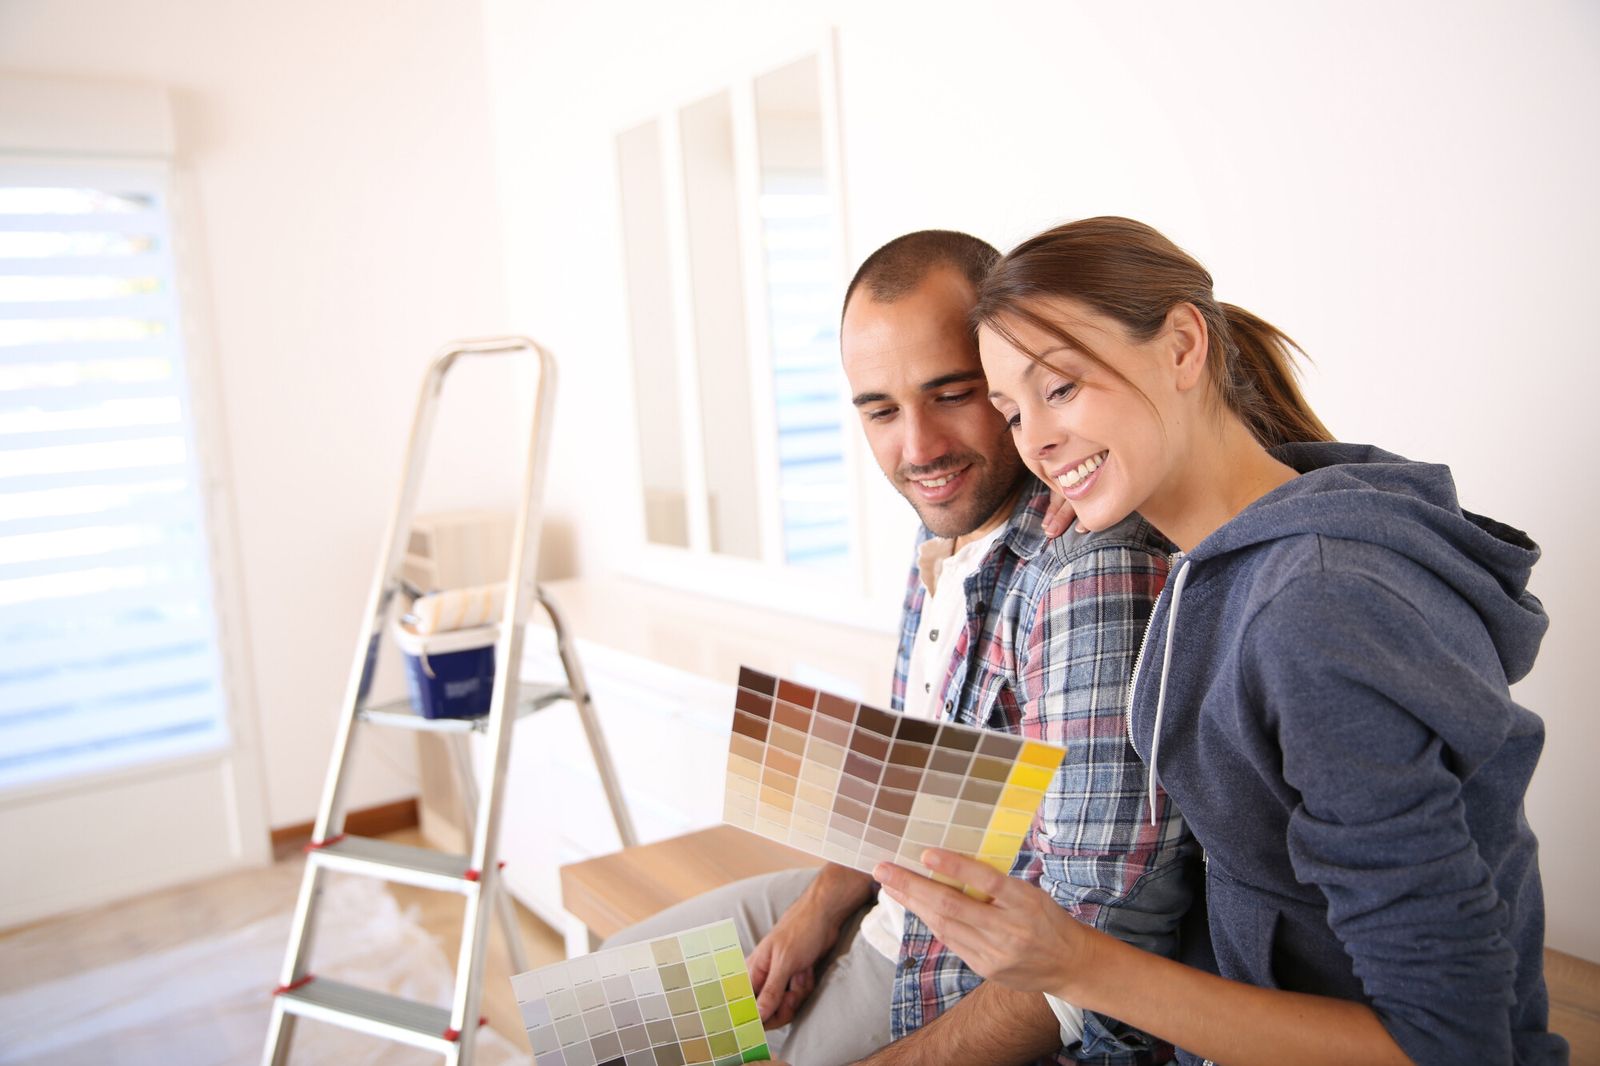 11 Home Improvement Projects to Increase Your Resale Value